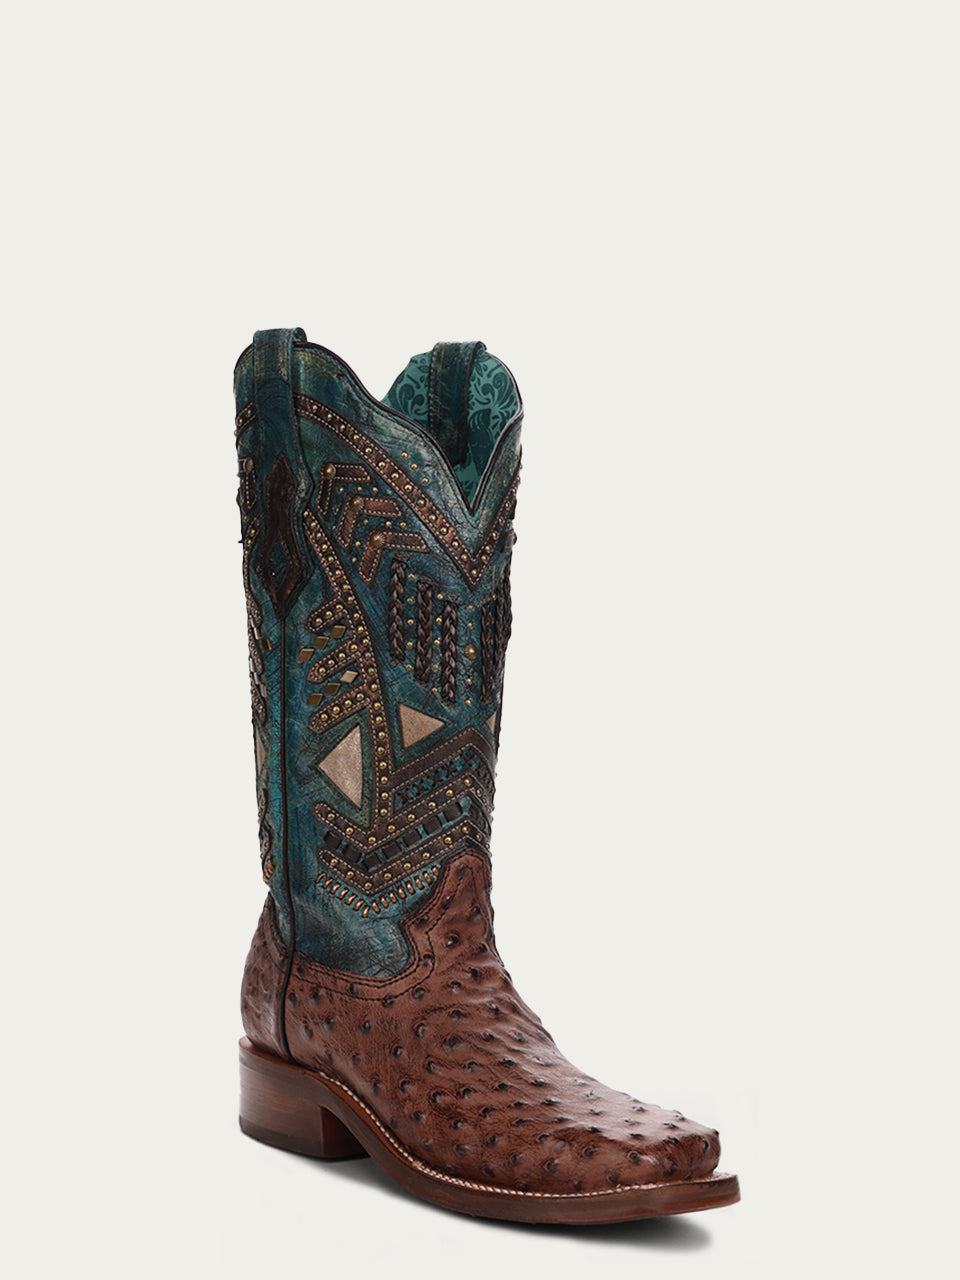 A4059 - WOMEN'S TURQUOISE EMBROIDERY, STUDED WITH WOVEN DETAIL BROWN OSTRICH SQUARE TOE RODEO BOOT